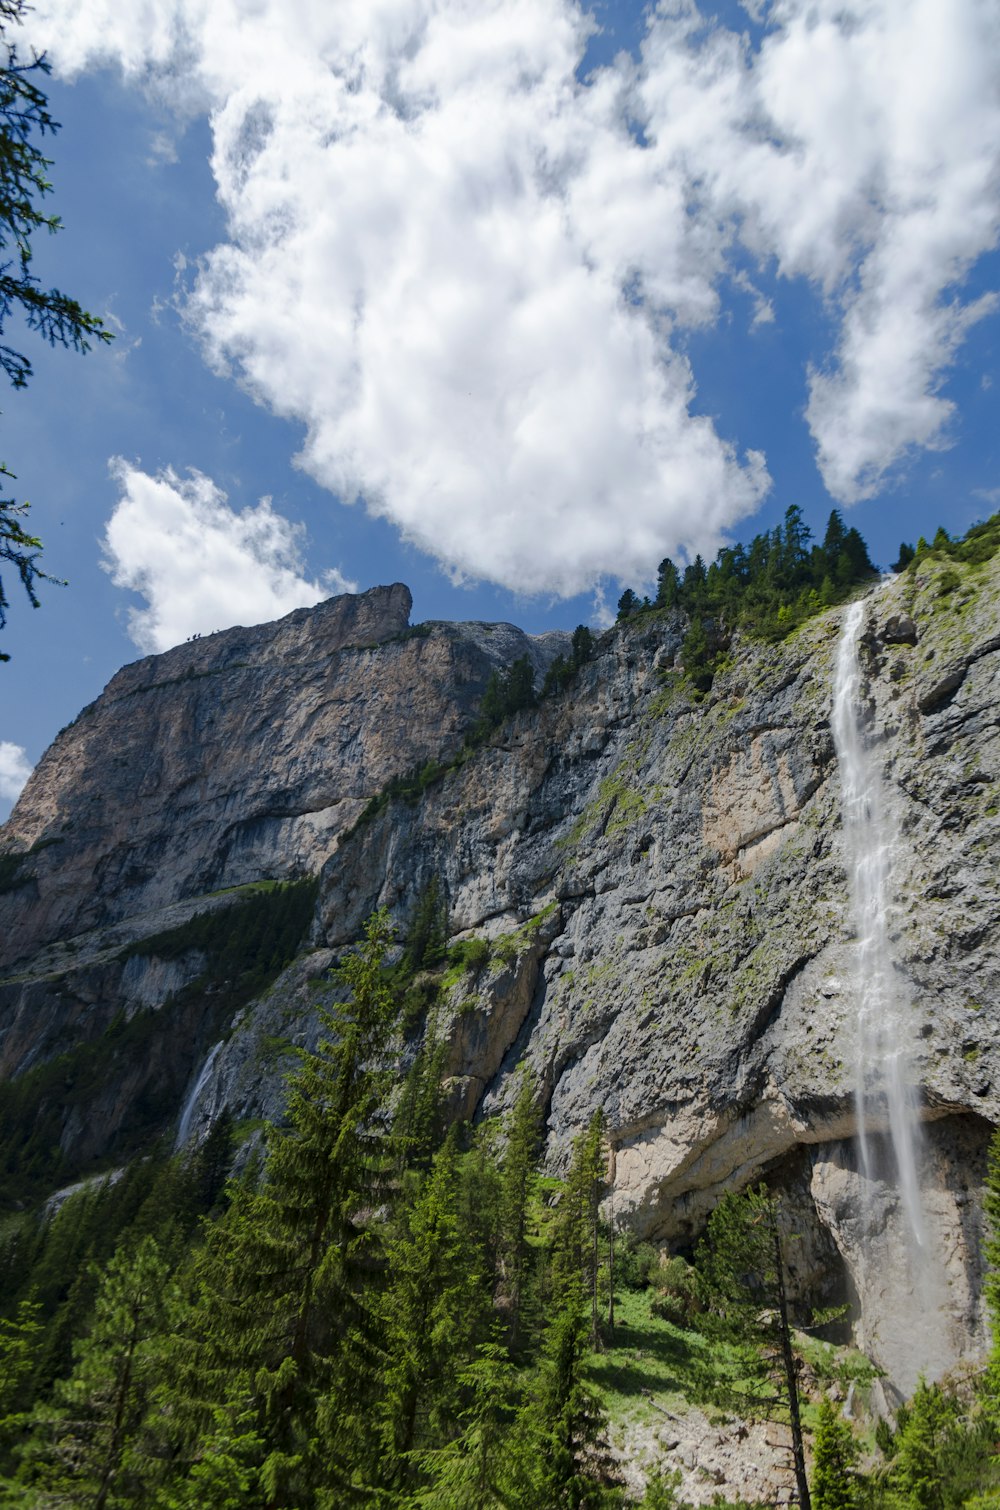 waterfalls on rocky mountain under blue and white cloudy sky during daytime